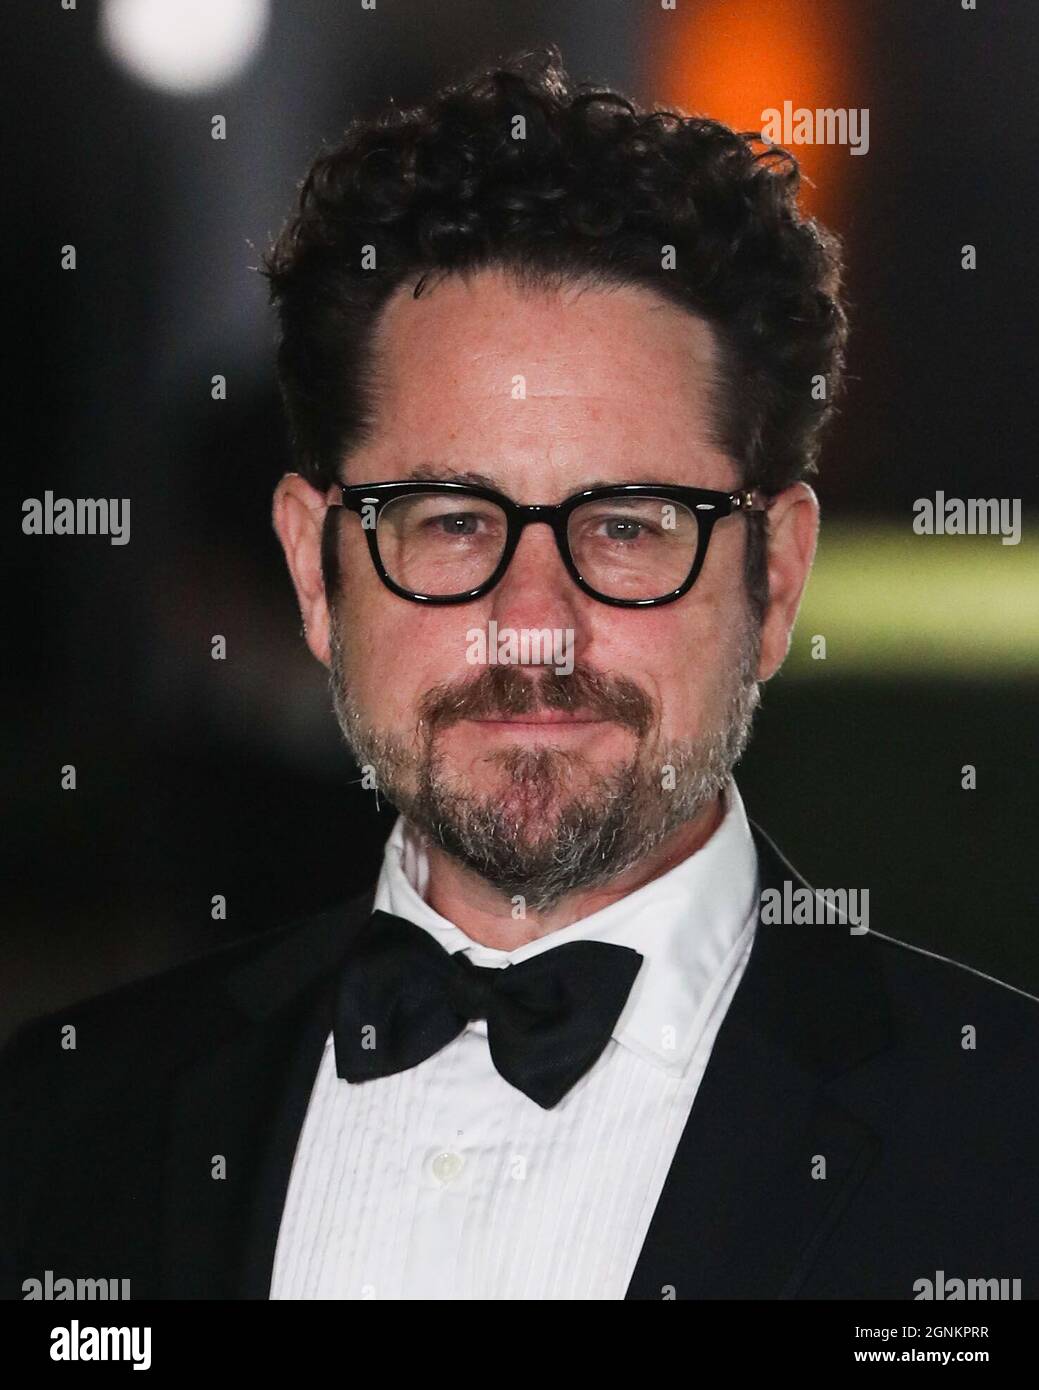 LOS ANGELES, CALIFORNIA, USA - SEPTEMBER 25: Director J.J. Abrams arrives at the Academy Museum of Motion Pictures Opening Gala held at the Academy Museum of Motion Pictures on September 25, 2021 in Los Angeles, California, United States. (Photo by Xavier Collin/Image Press Agency/Sipa USA) Stock Photo